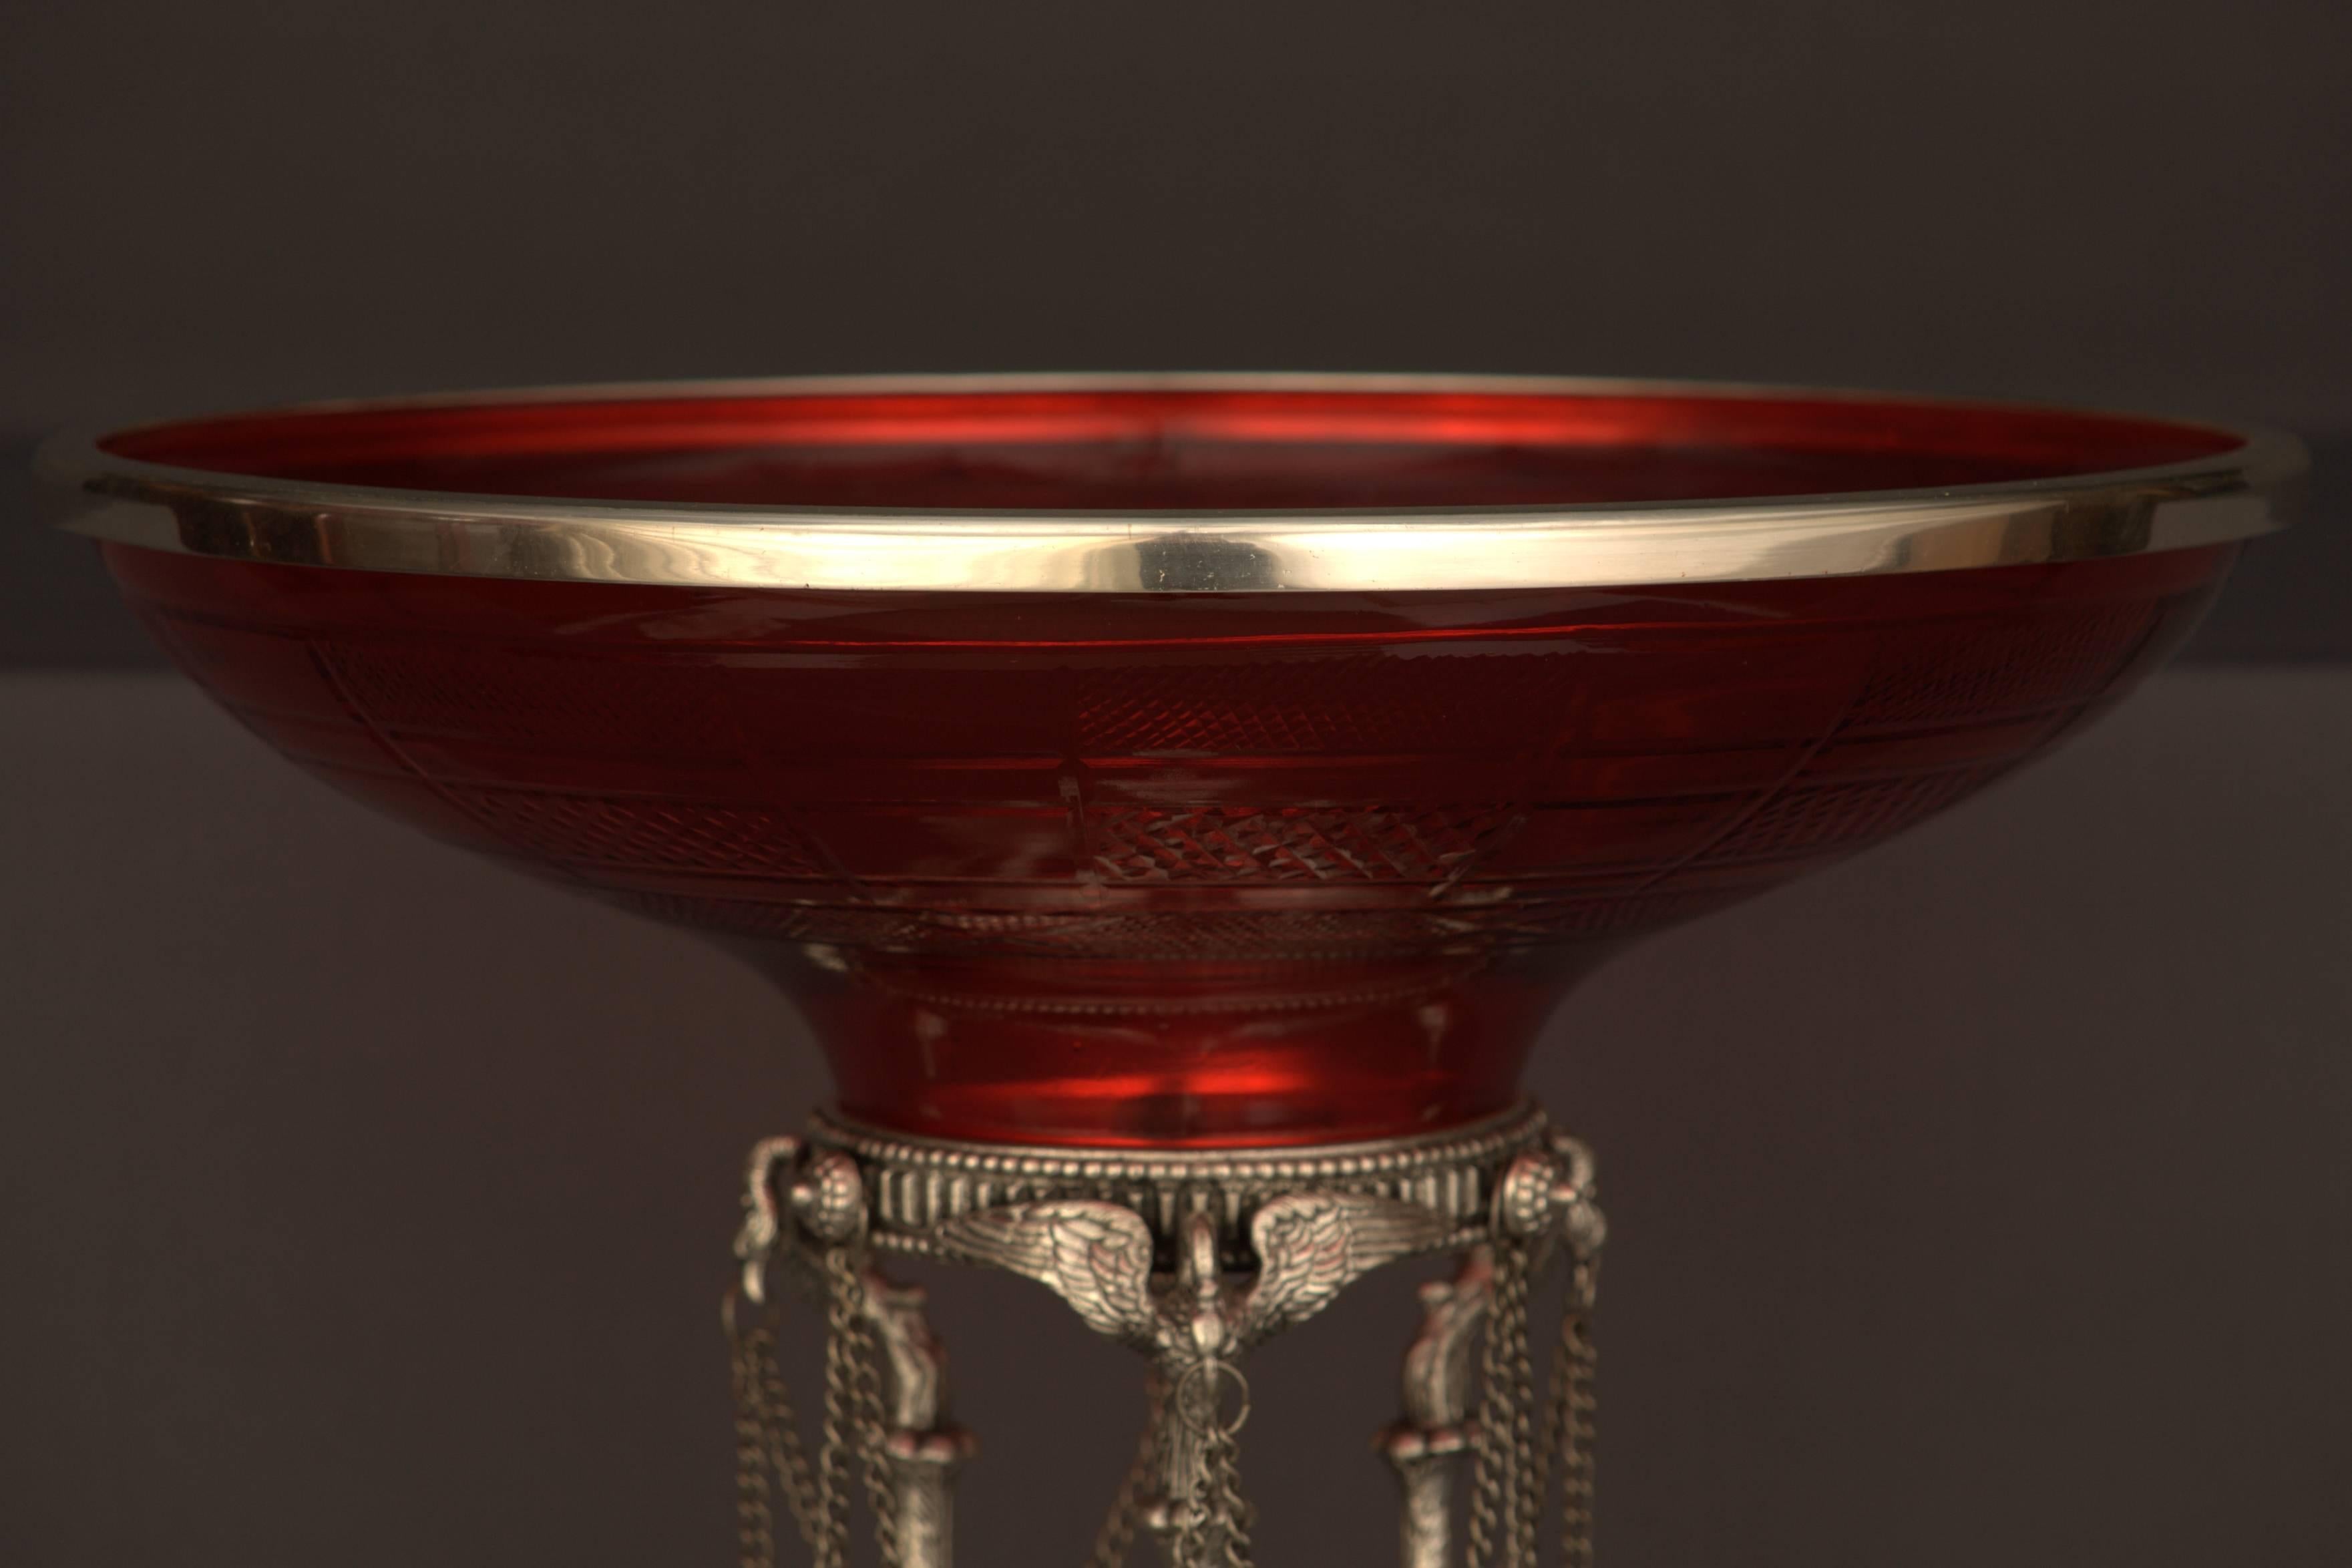 Bronze, engraved and silvered. Three column shafts with full-plastic swans.
Ruby-red glass with cut decoration. Measures: Diameter 34 cm, height: 35 cm.